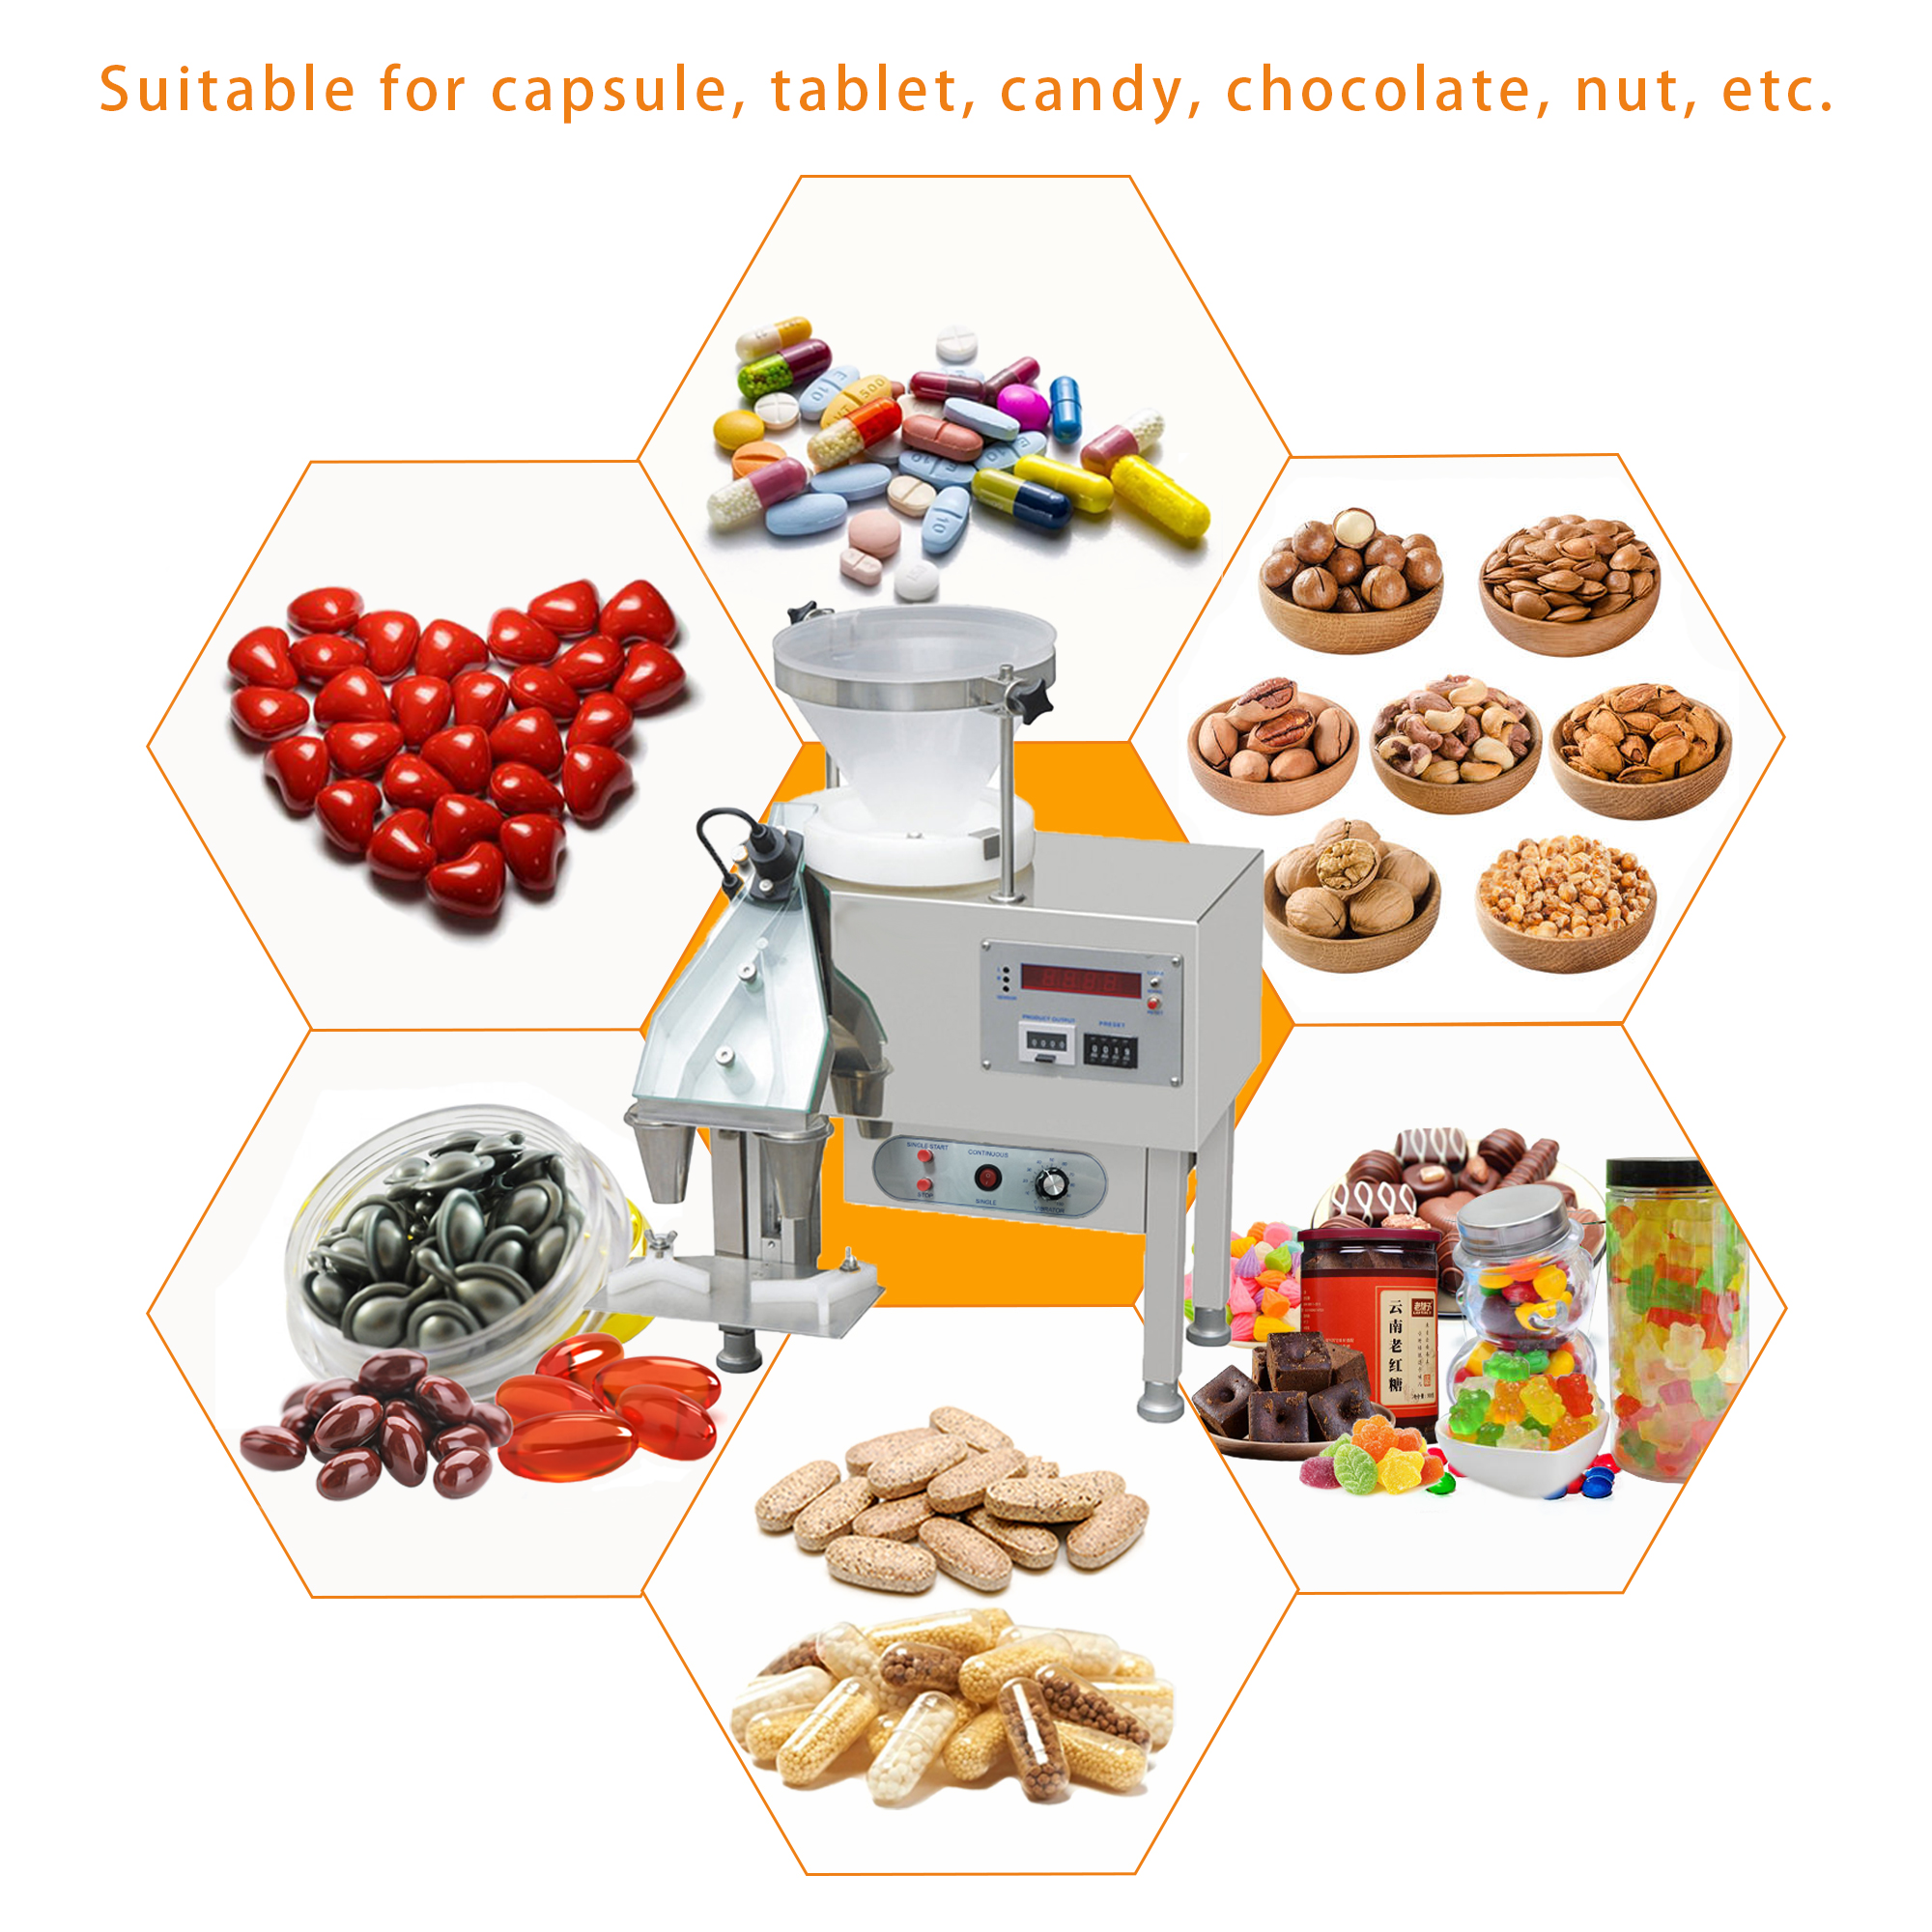 Accurate counting small automatic tablet counting machine automatic